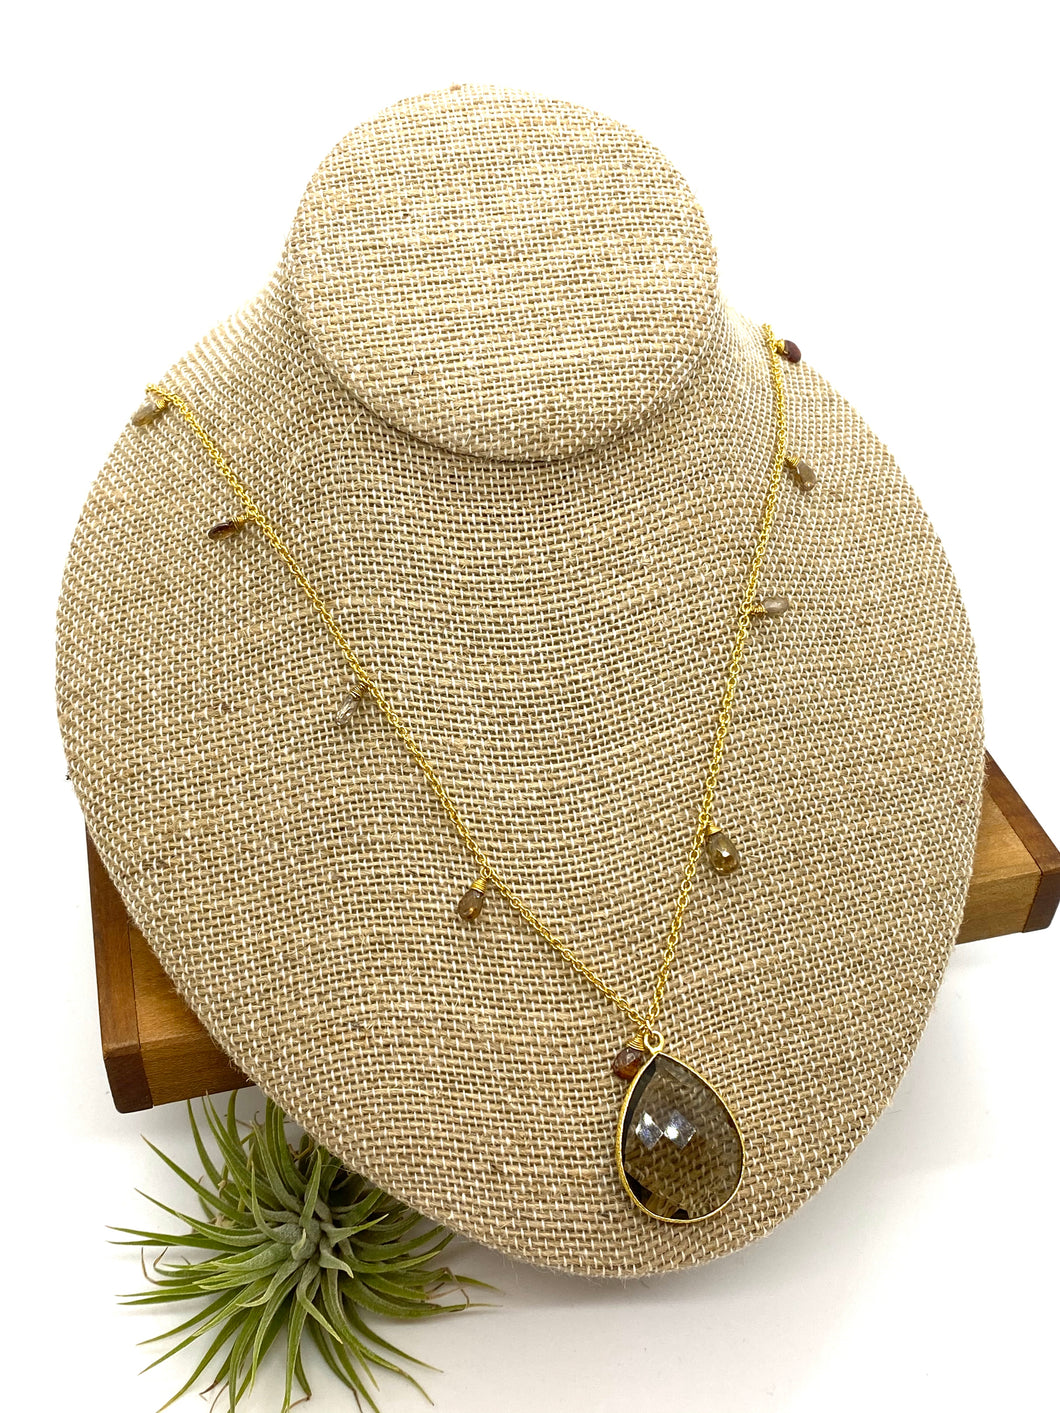 Long Smoky Quartz and Andalucite Statement Necklace